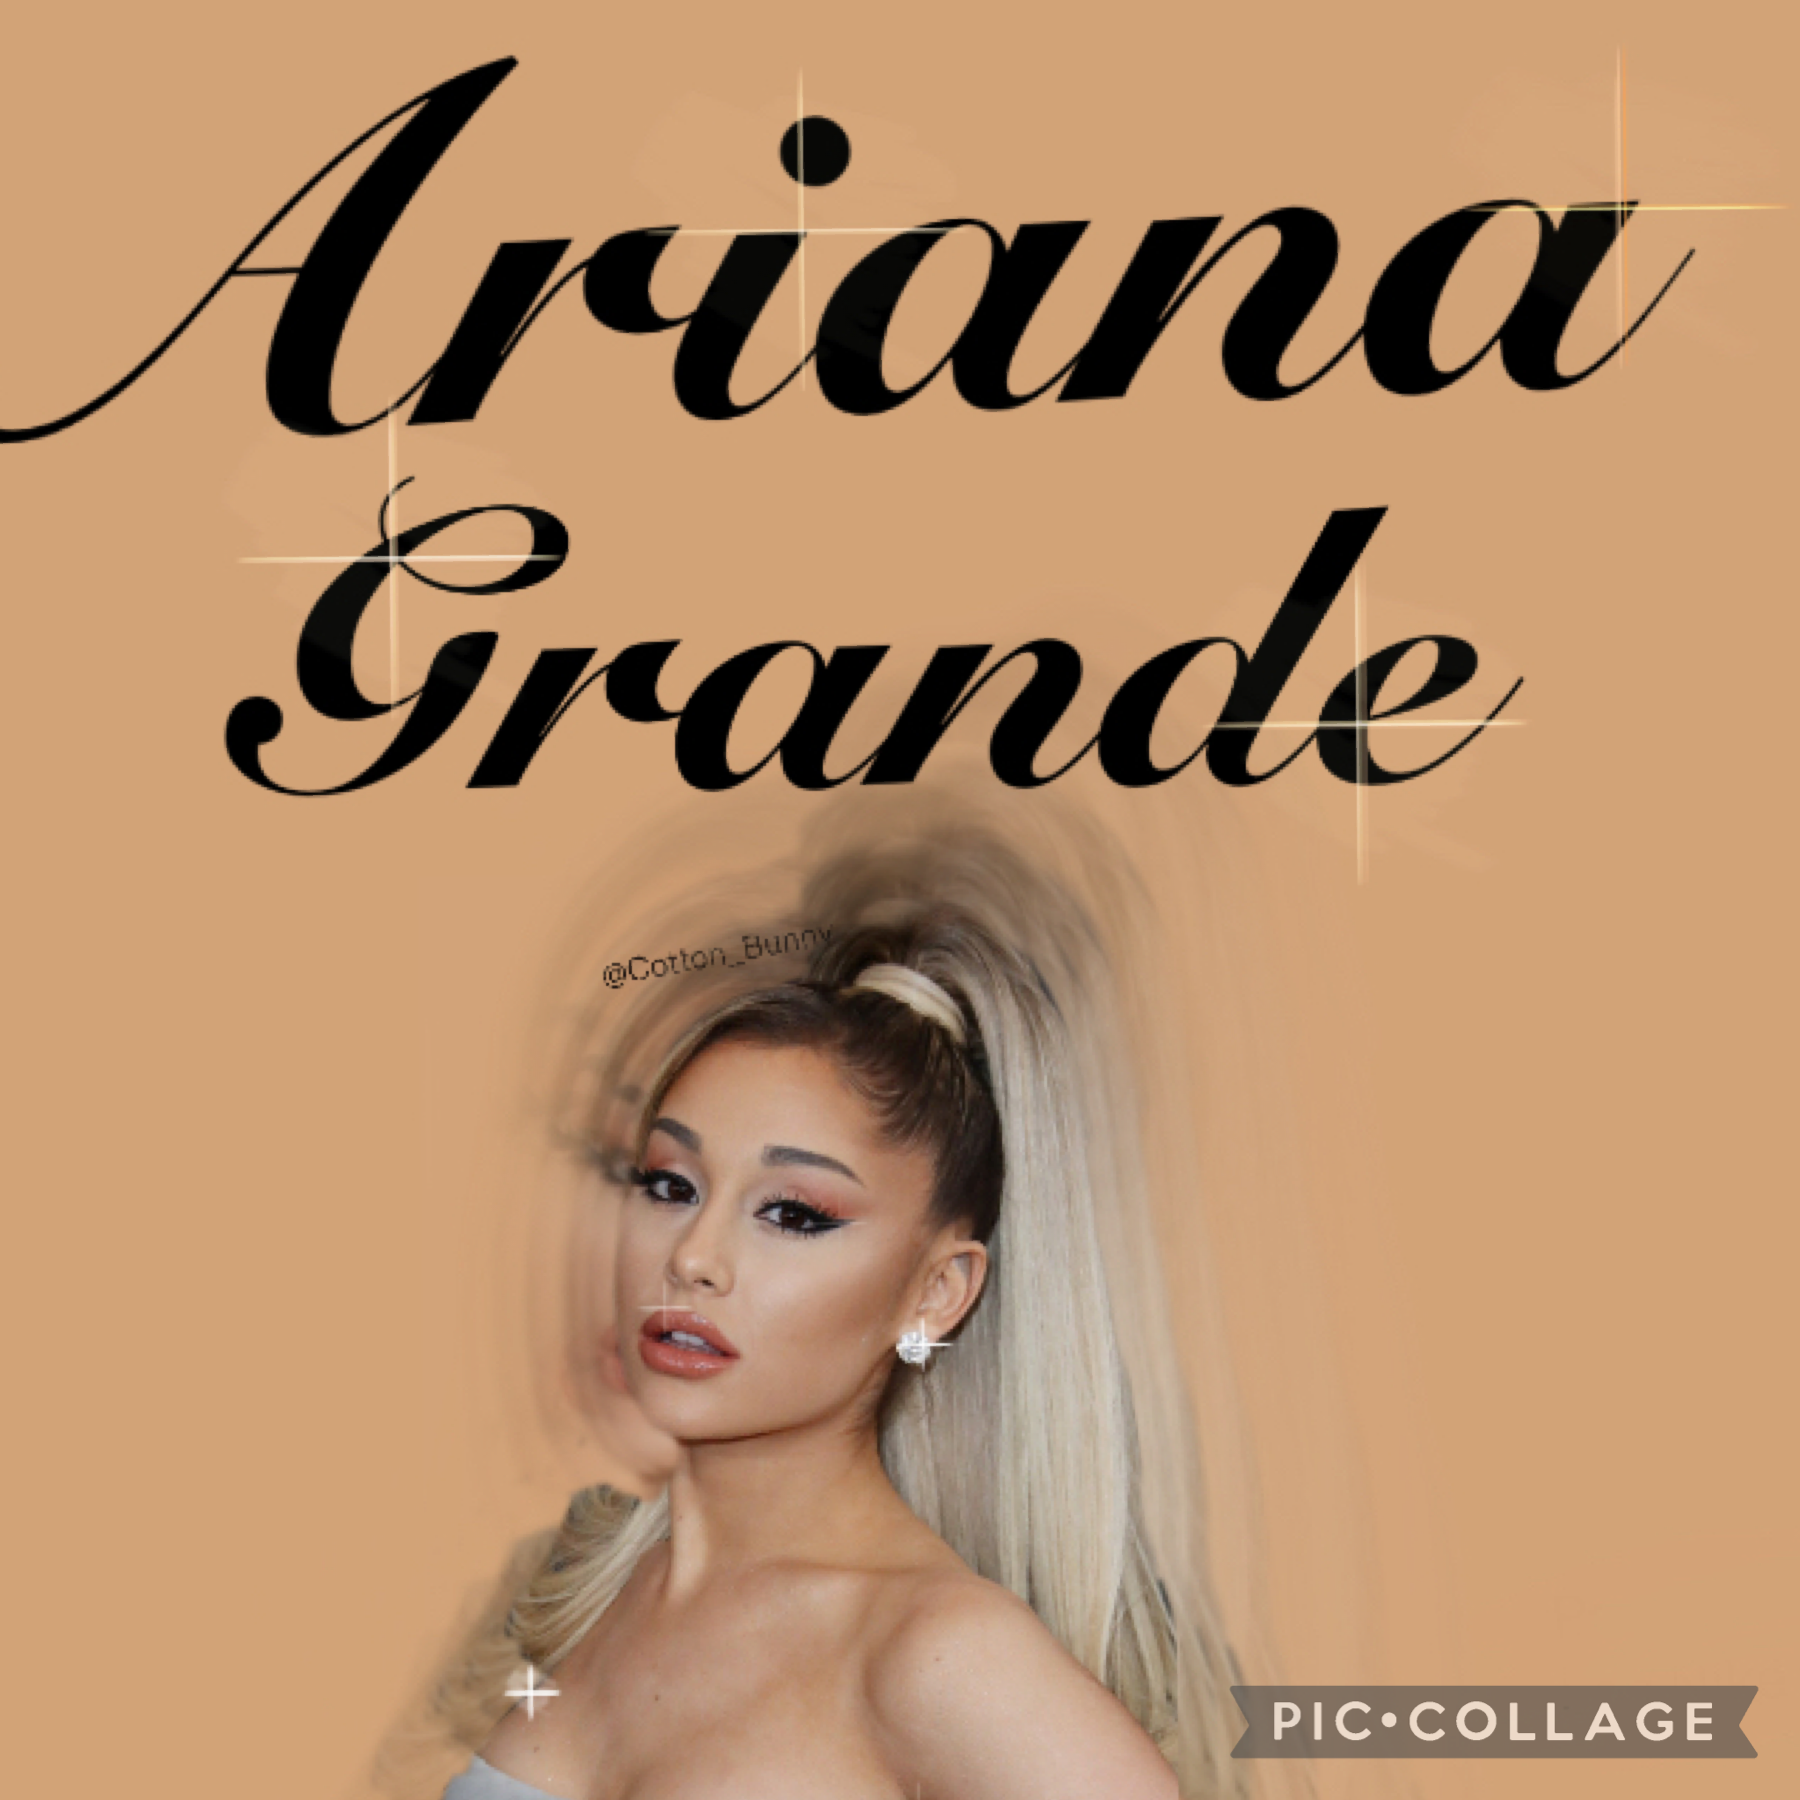 Ariana grande 😚 (Go to the comments)